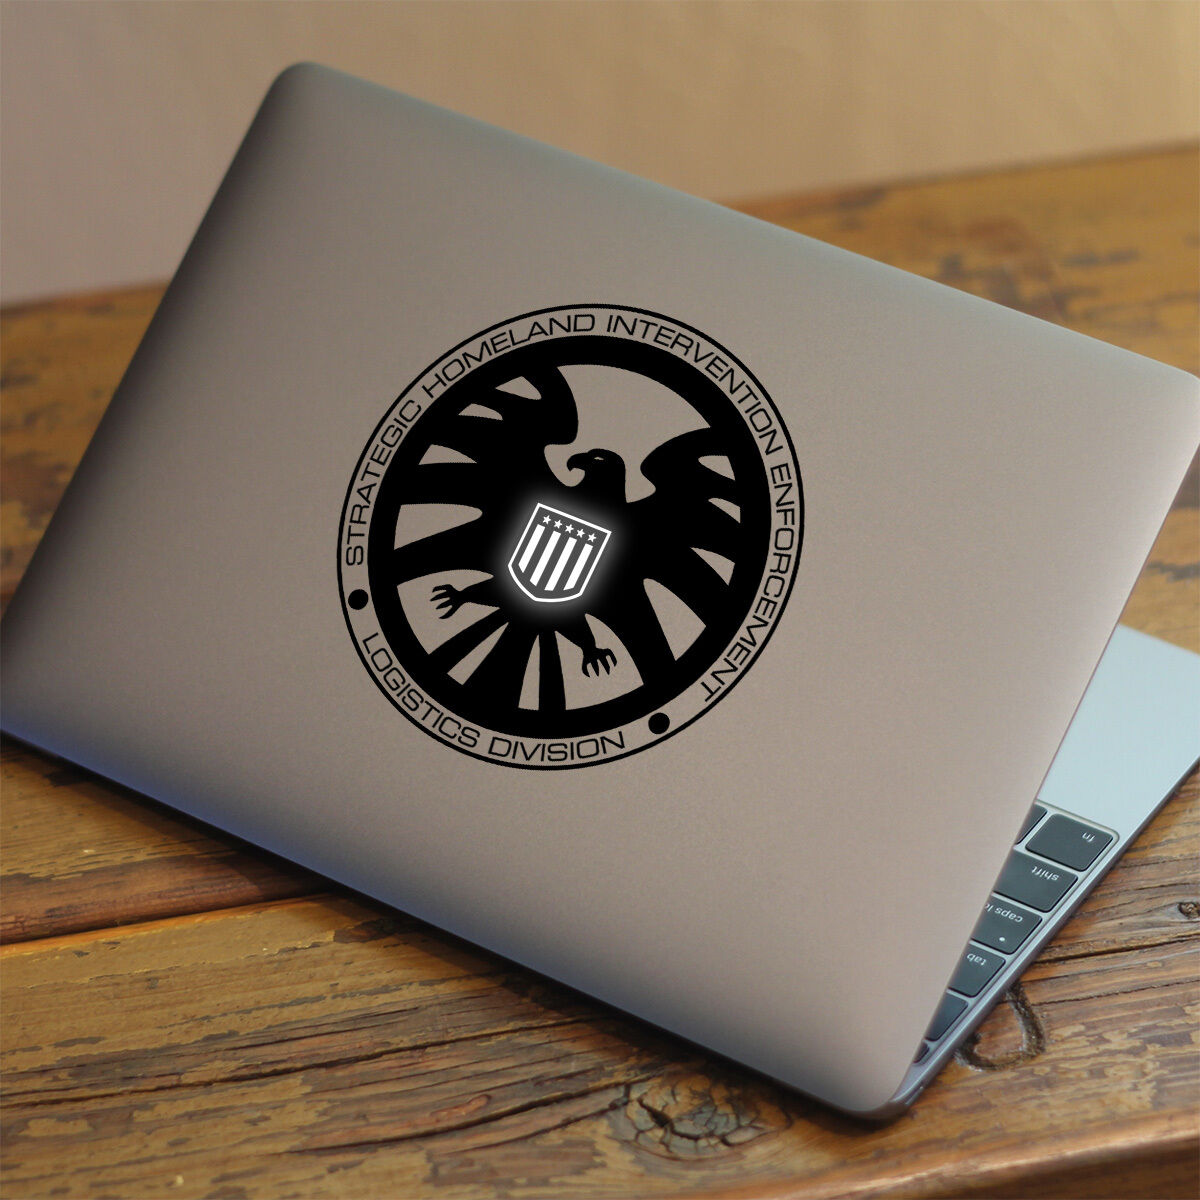 AGENTS OF SHIELD Apple MacBook Decal Sticker fits all MacBook models